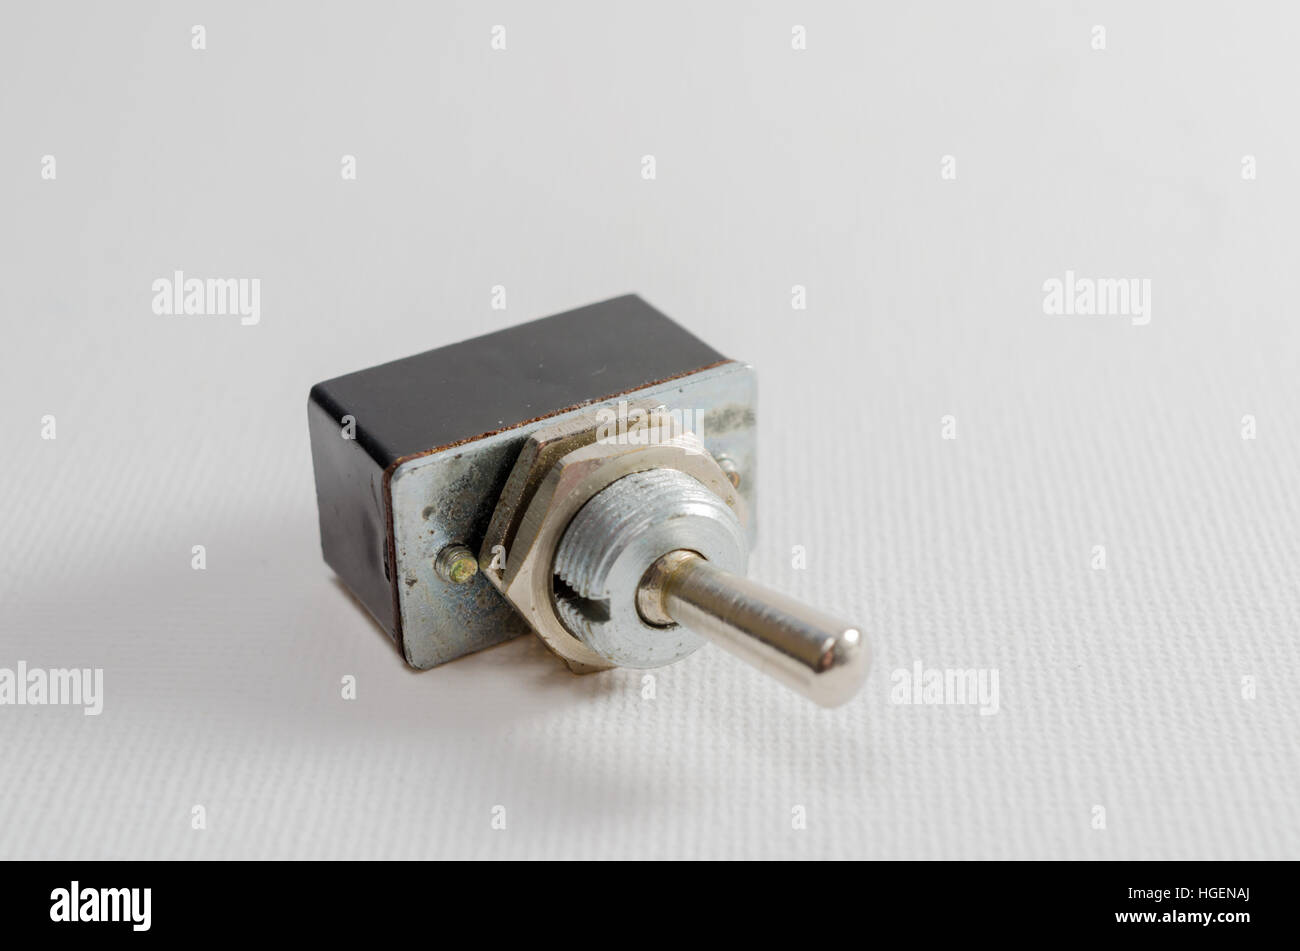 A Studio Photograph of an Old Metal Toggle Switch Stock Photo